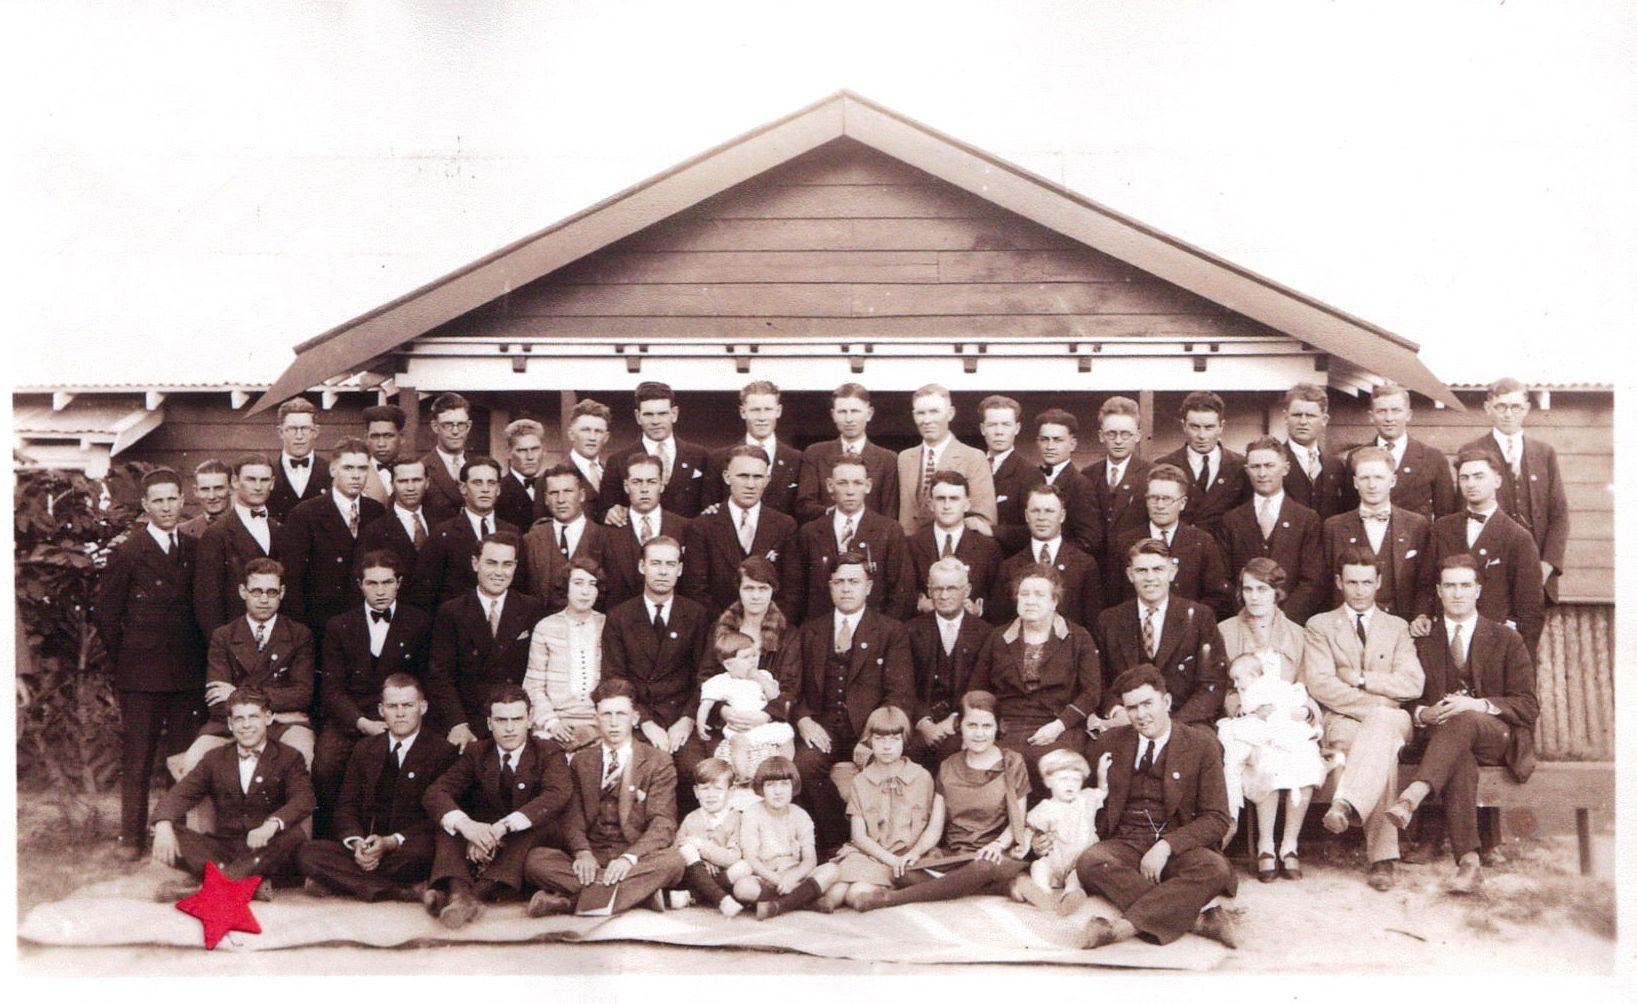 Mission Conference held in Ngaruawahia, 7 April 1928